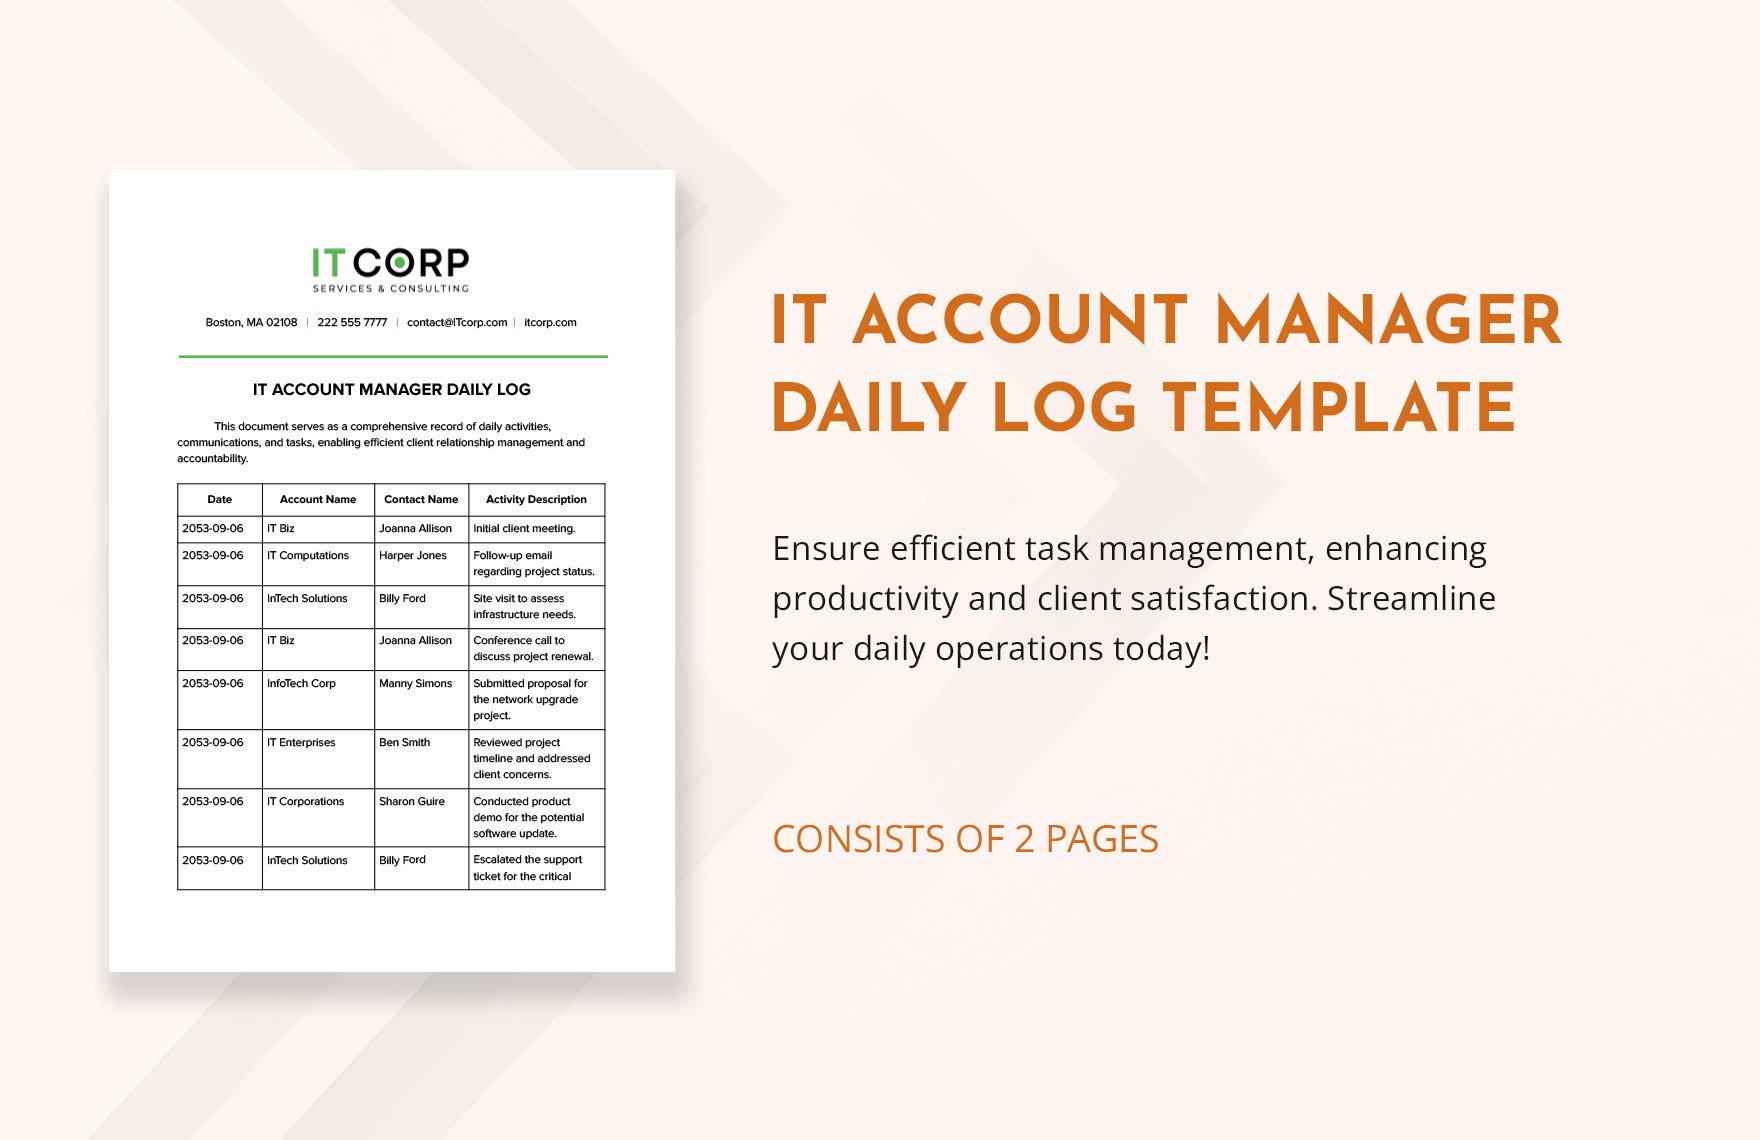 IT Account Manager Daily Log Template